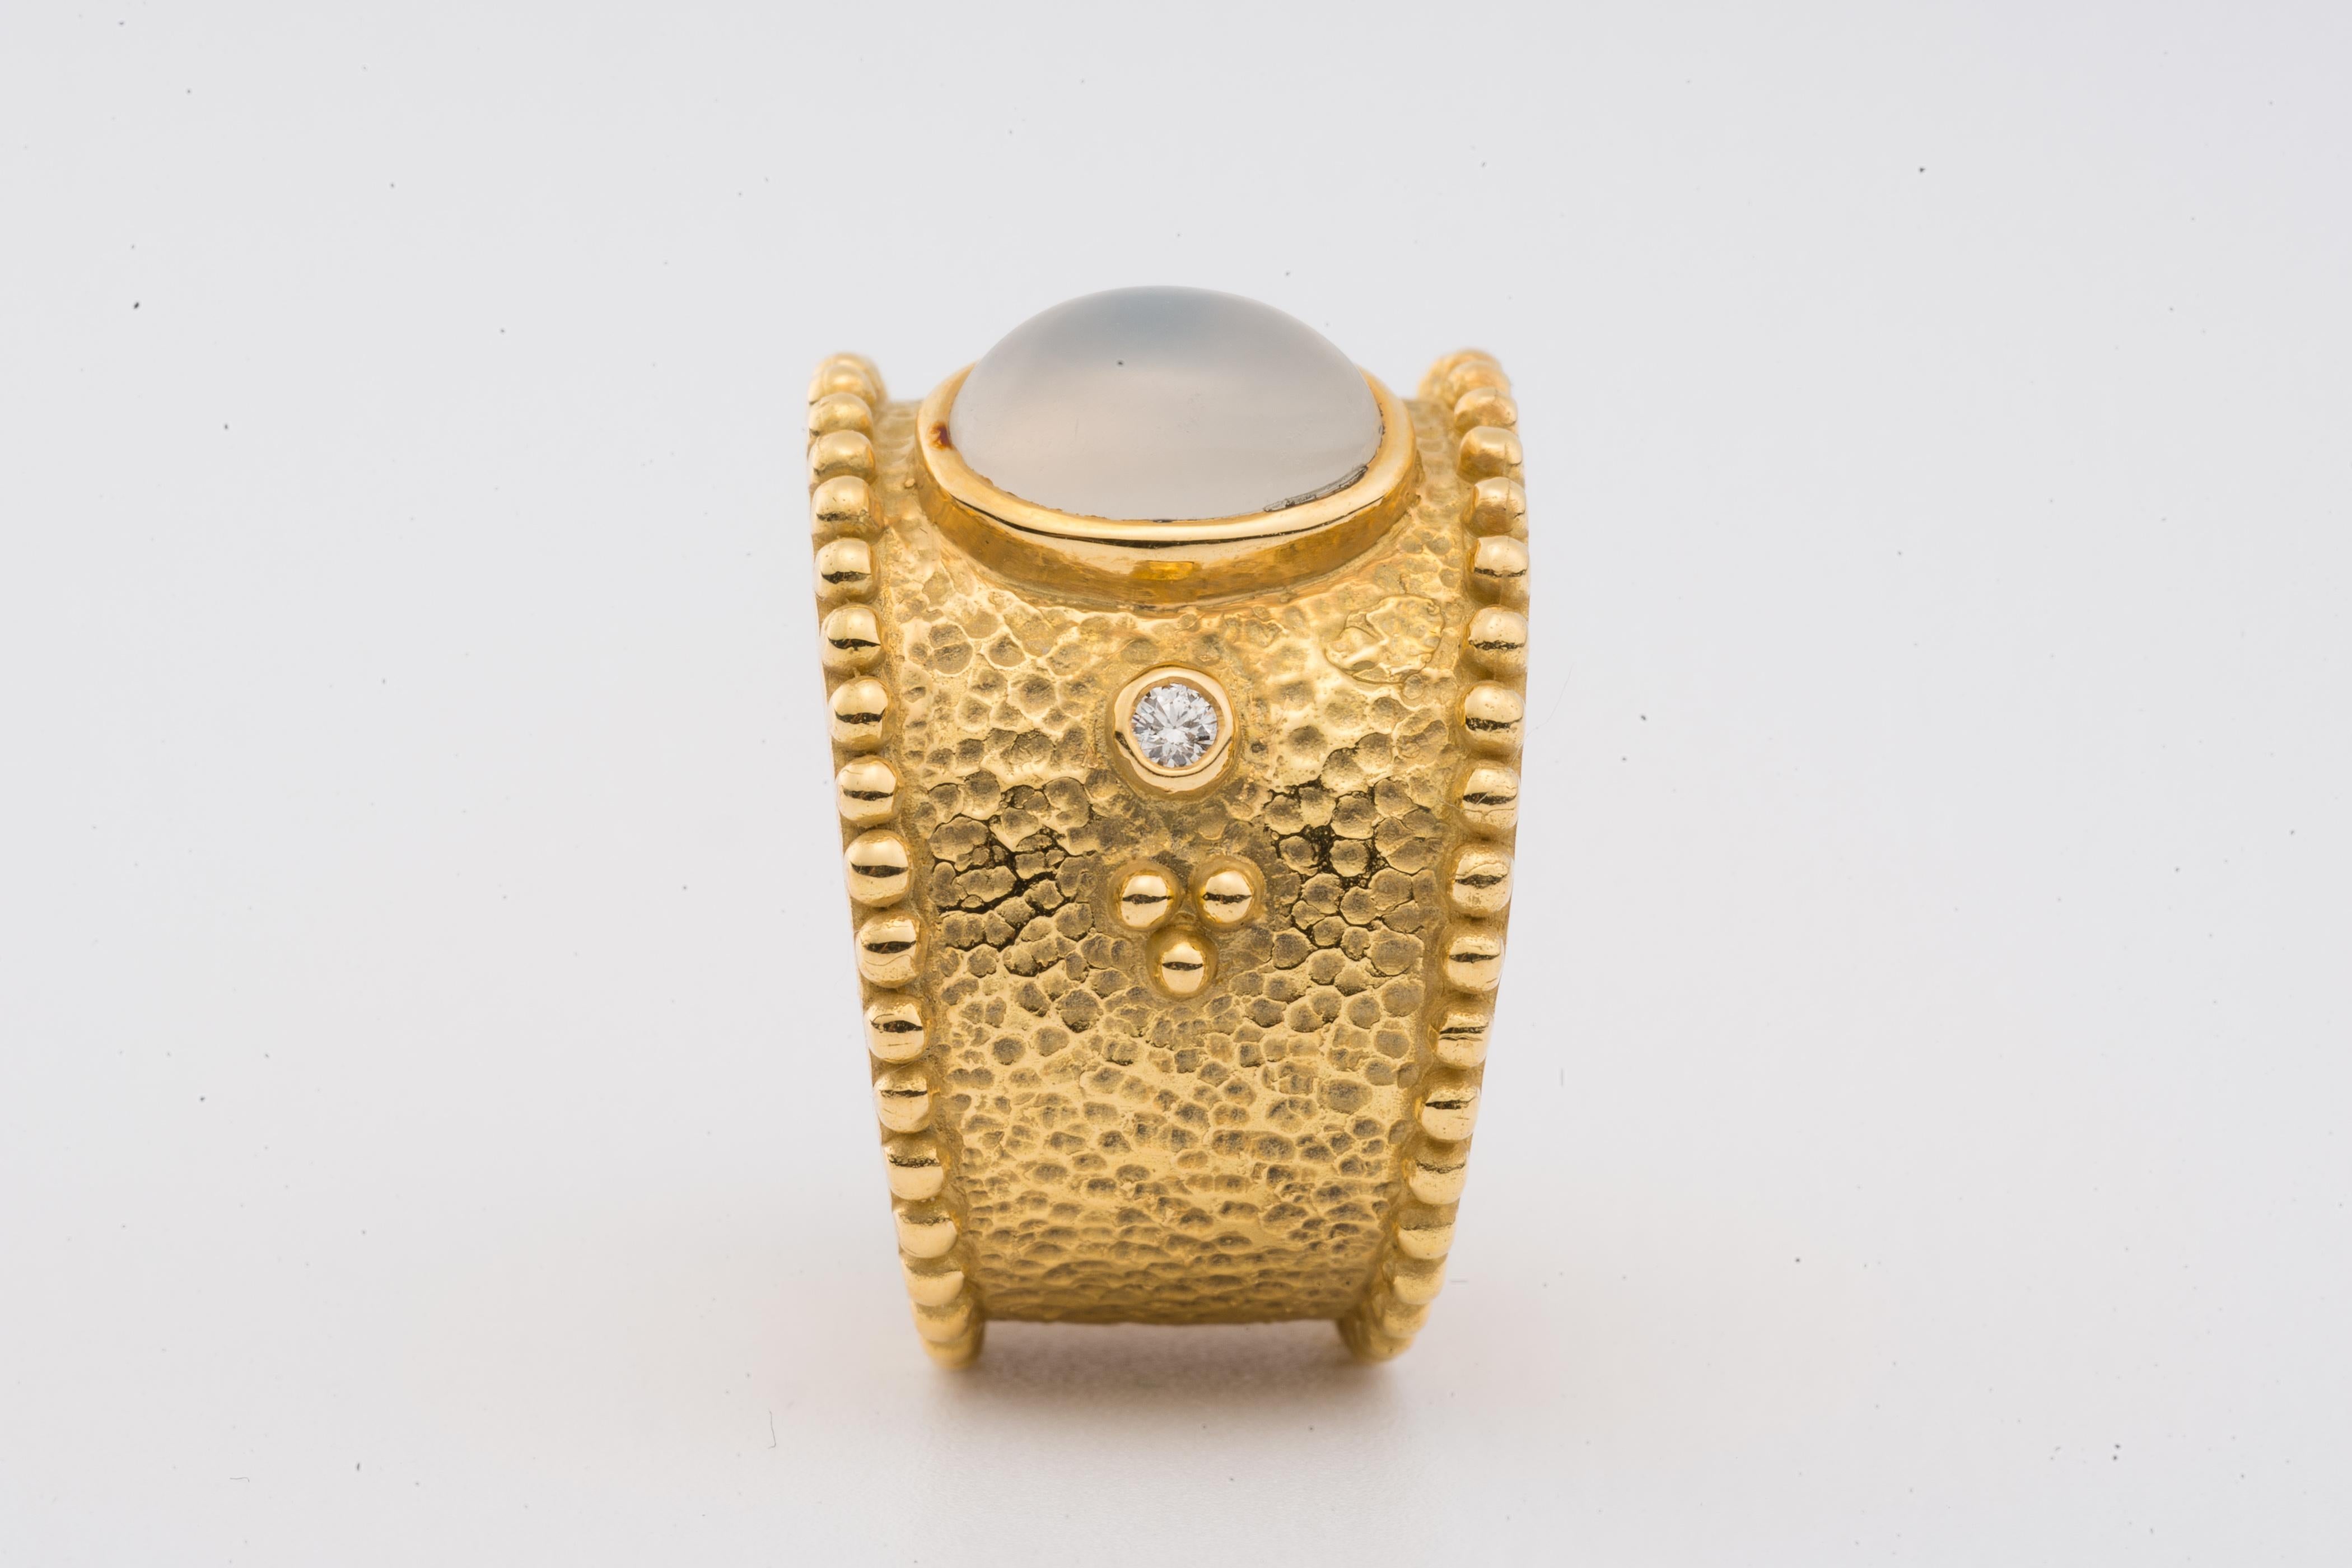 A hand-crafted 18K gold ring with an oval cabochon moonstone gem flanked by small  diamonds on the hand-hammered gold band, decorated with beaded edges.  

American ring size: 6 (Inside diameter: 16.6mm)

Designed by AMANDA CLARK for Altfield, our